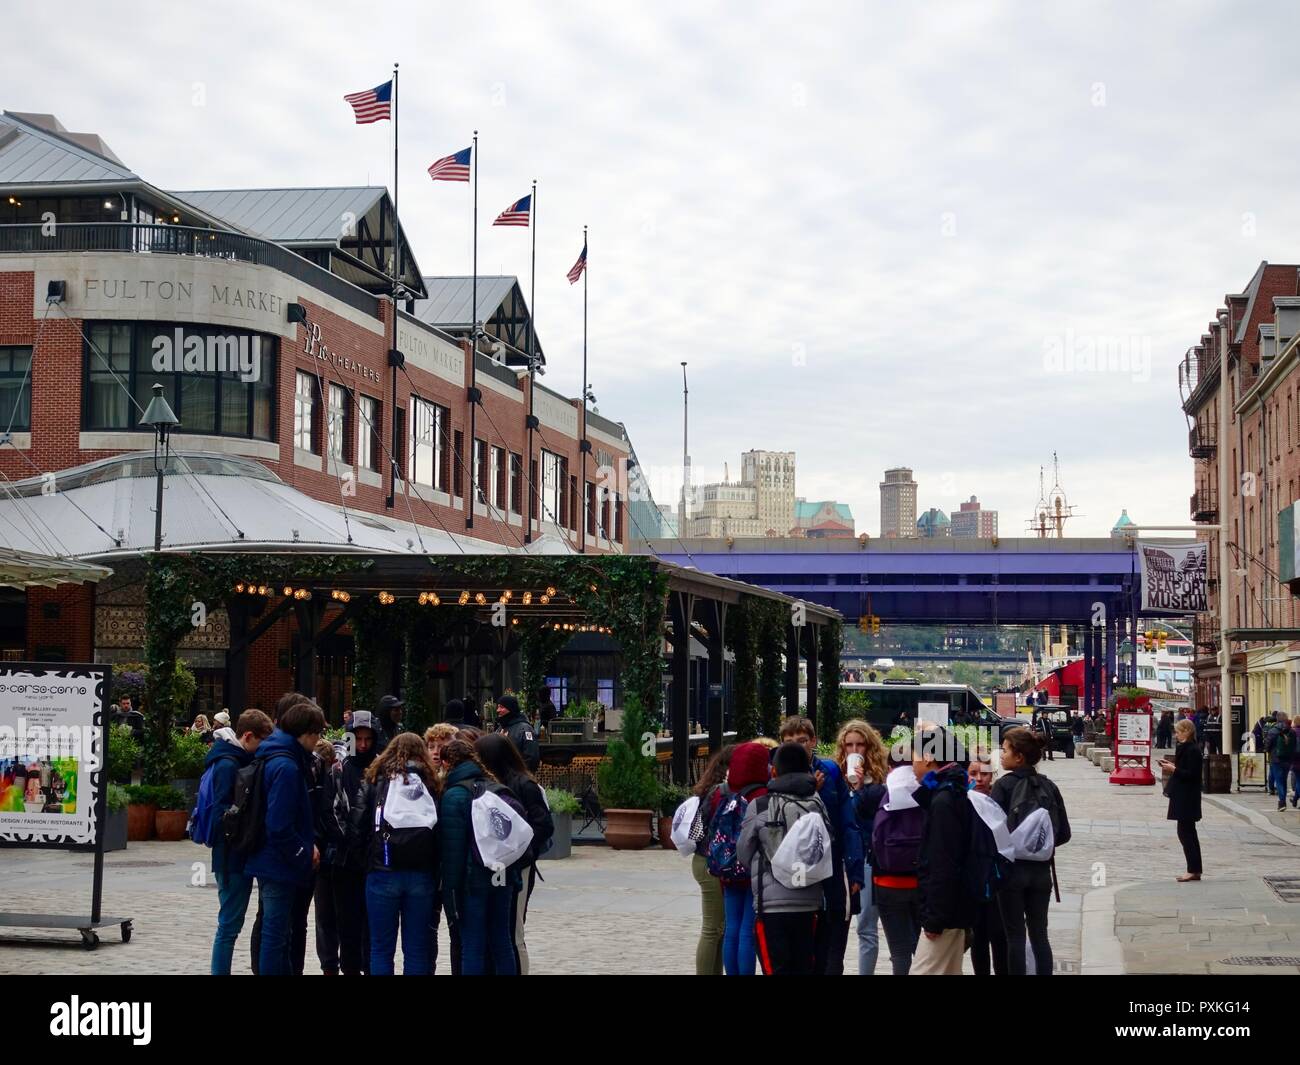 Groups of teenage students, standing in front of shops, on a trip to the South Street Seaport District, Lower Manhattan, New York, NY, USA. Stock Photo